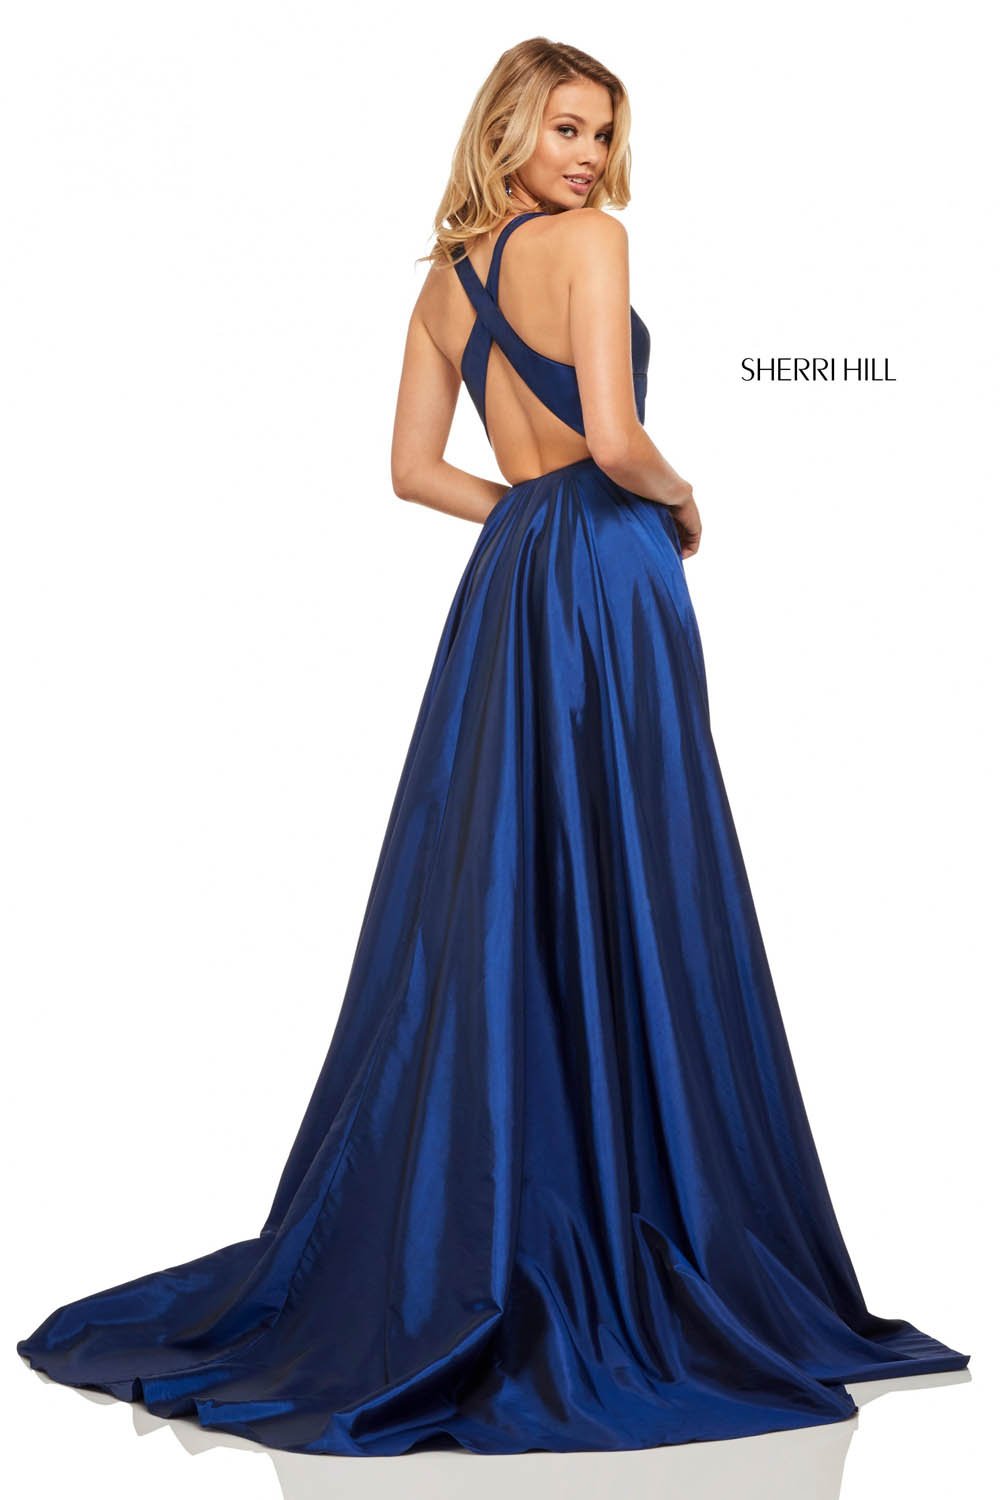 Sherri Hill 52923 dress images in these colors: Lilac, Royal, Yellow, Blush, Emerald, Light Blue, Bright Pink, Navy, Red.